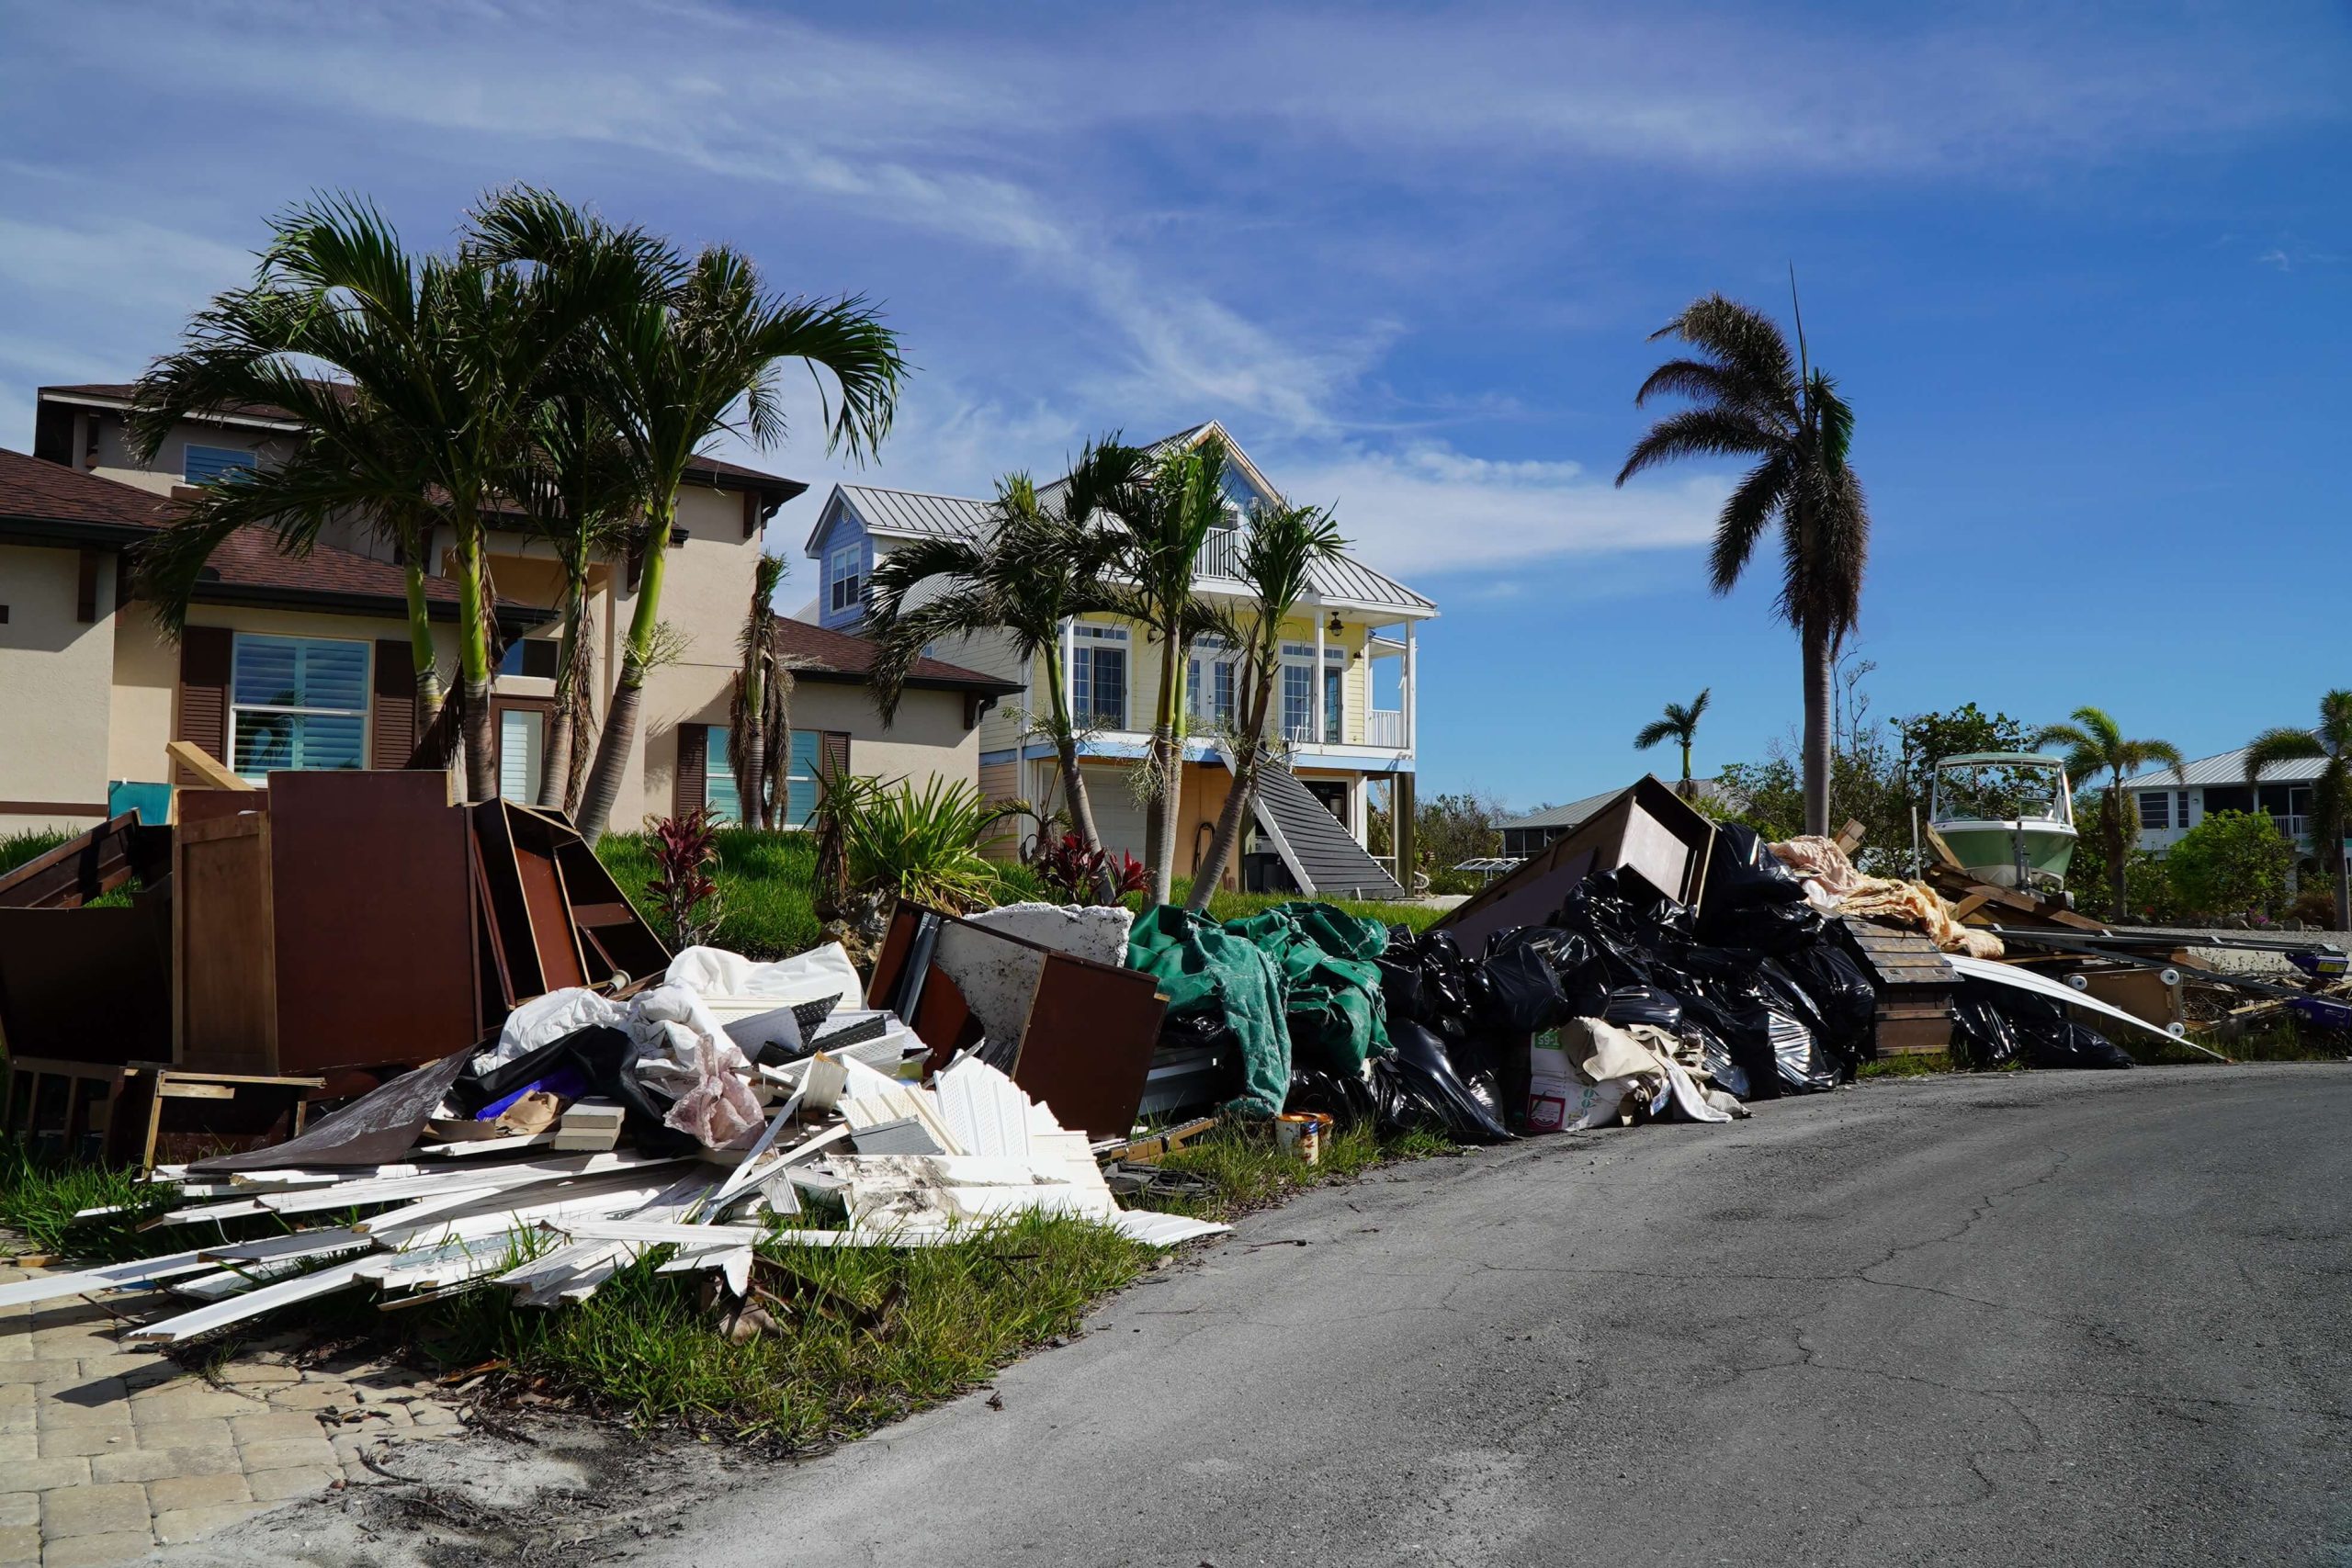 Piles of debris, including furniture, sit on the curb waiting to be picked up. A yellow building stands behind the debris – it was one of a few structures left standing in Fort Myers Beach after Hurricane Ian. (Jiahui Huang/Columbia Journalism Investigations)